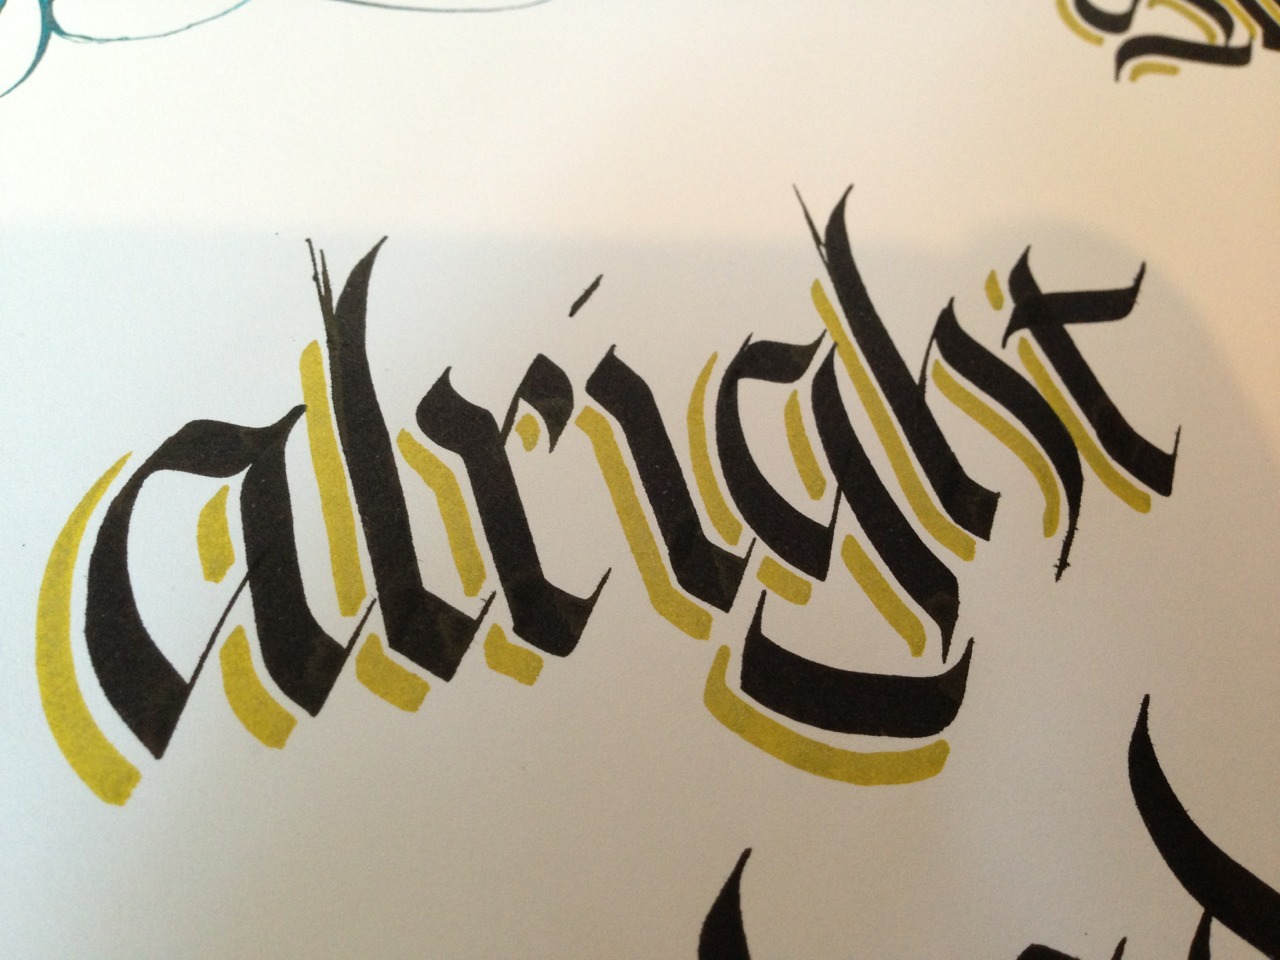 Had a quick go at some fraktur. Done with a pilot parallel and gold marker. 

I also got through about 30 requests of 500 yesterday.